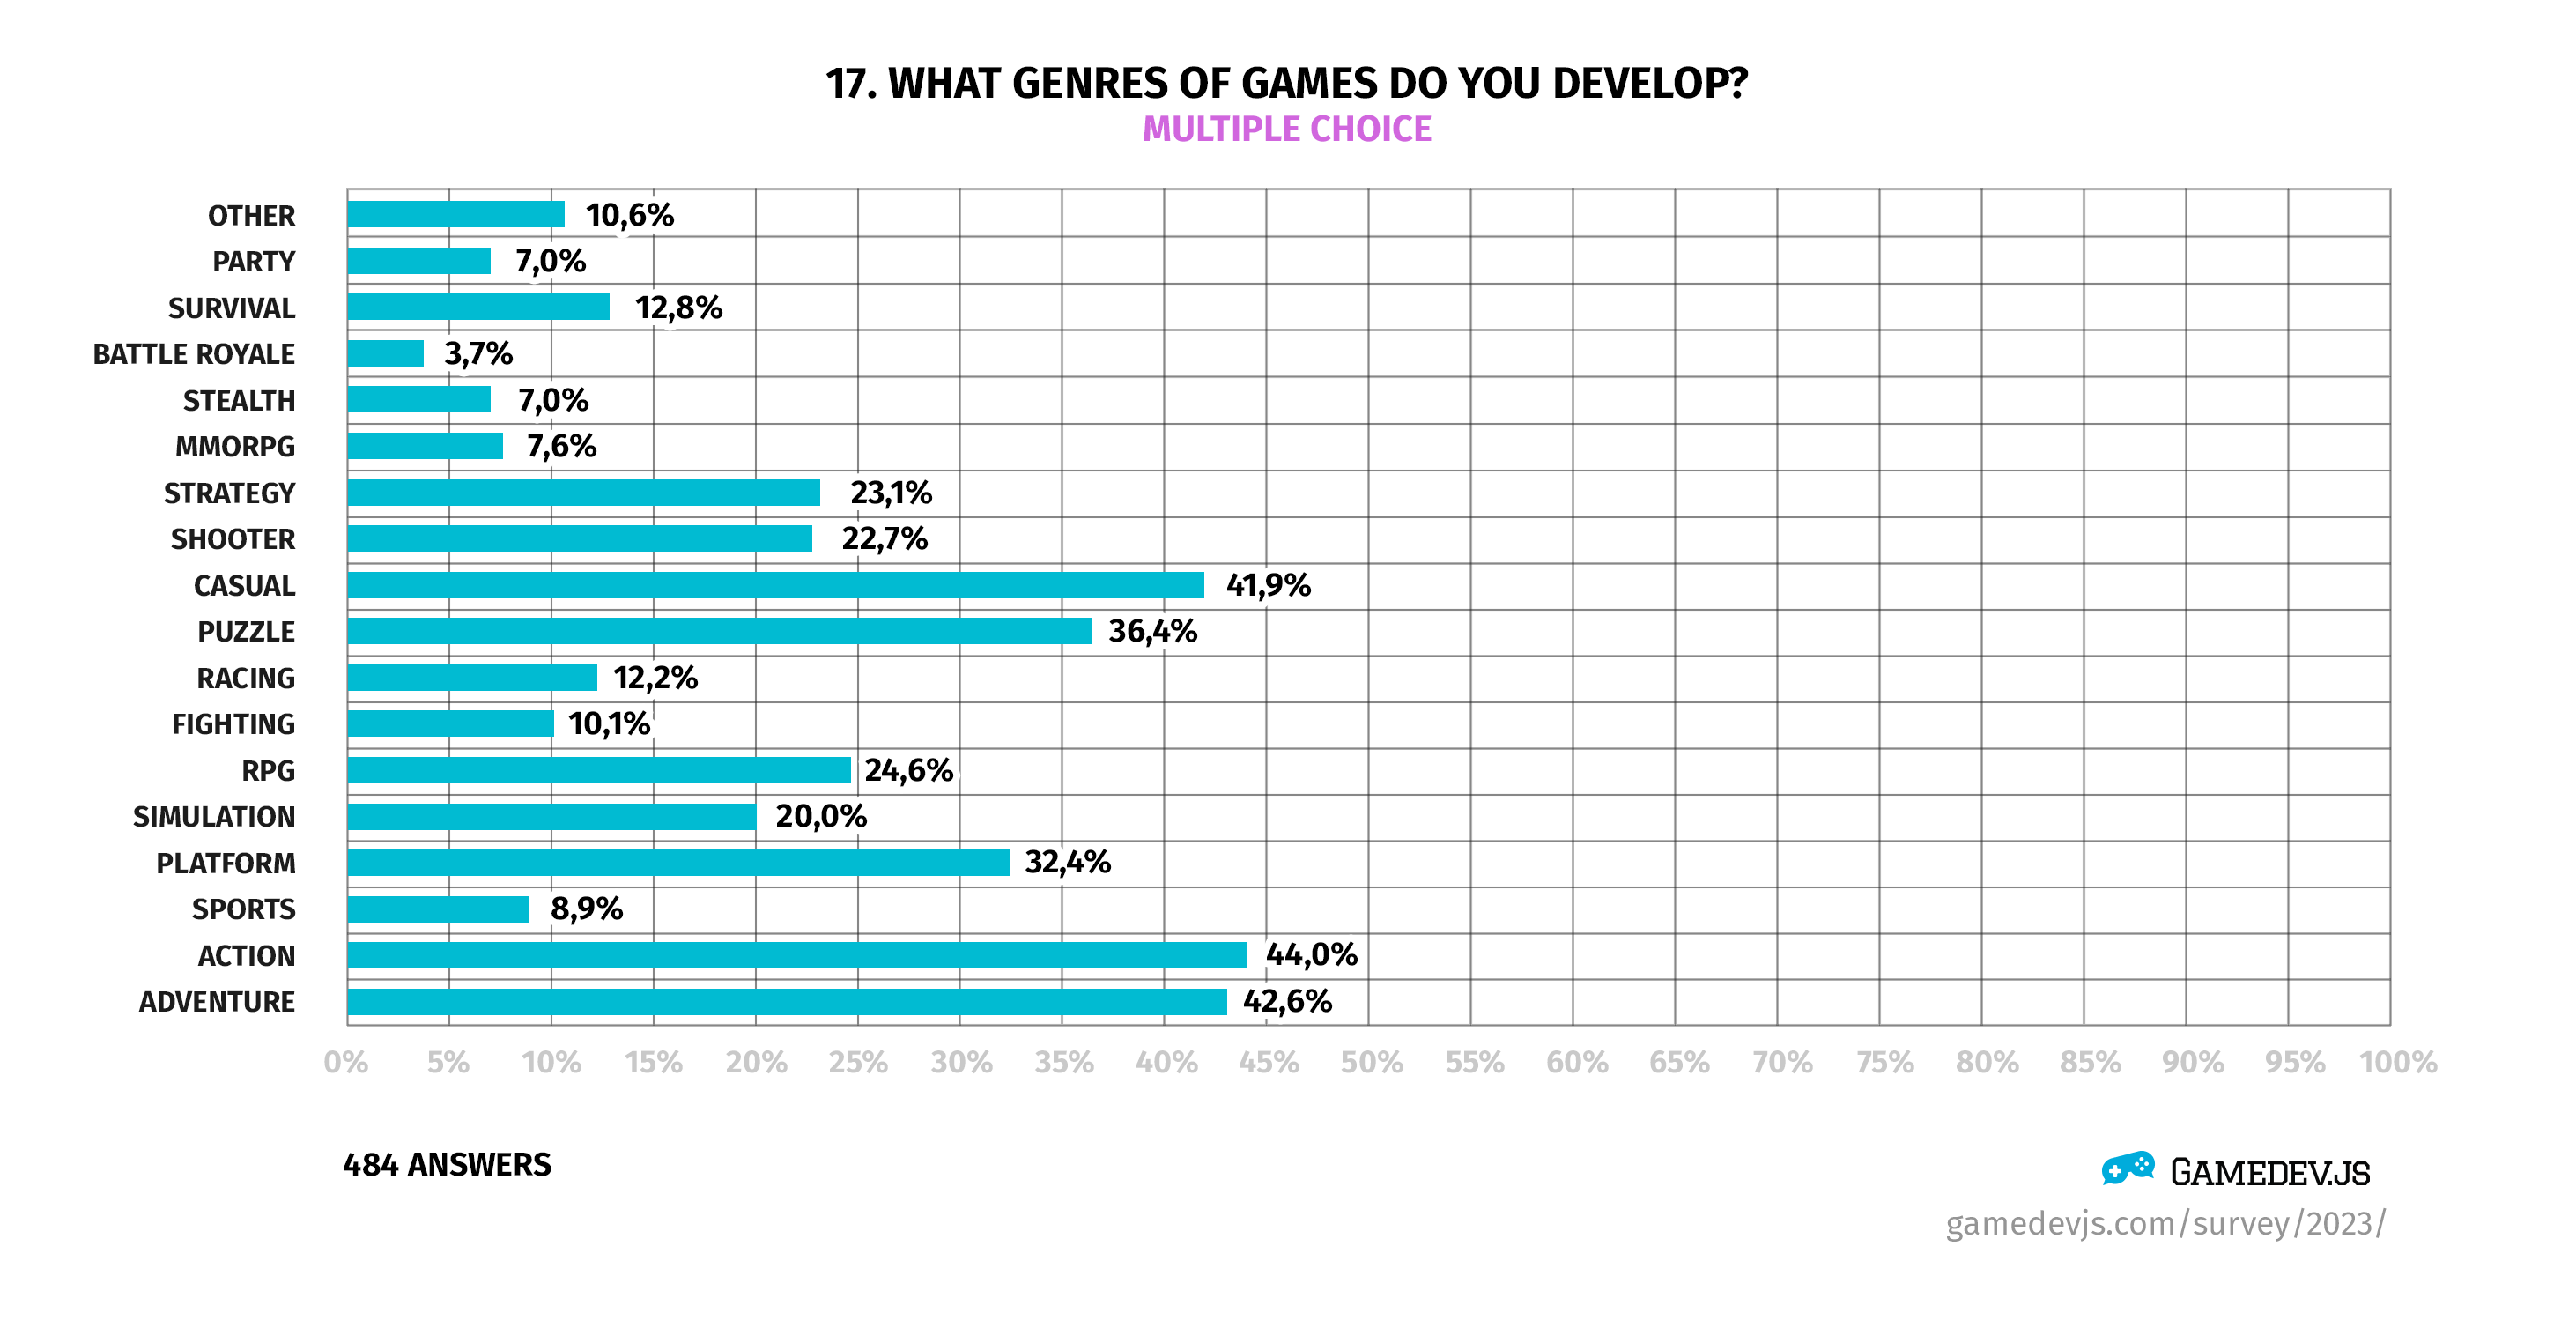 Gamedev.js Survey 2023 - Question #17: What genres of games do you develop?